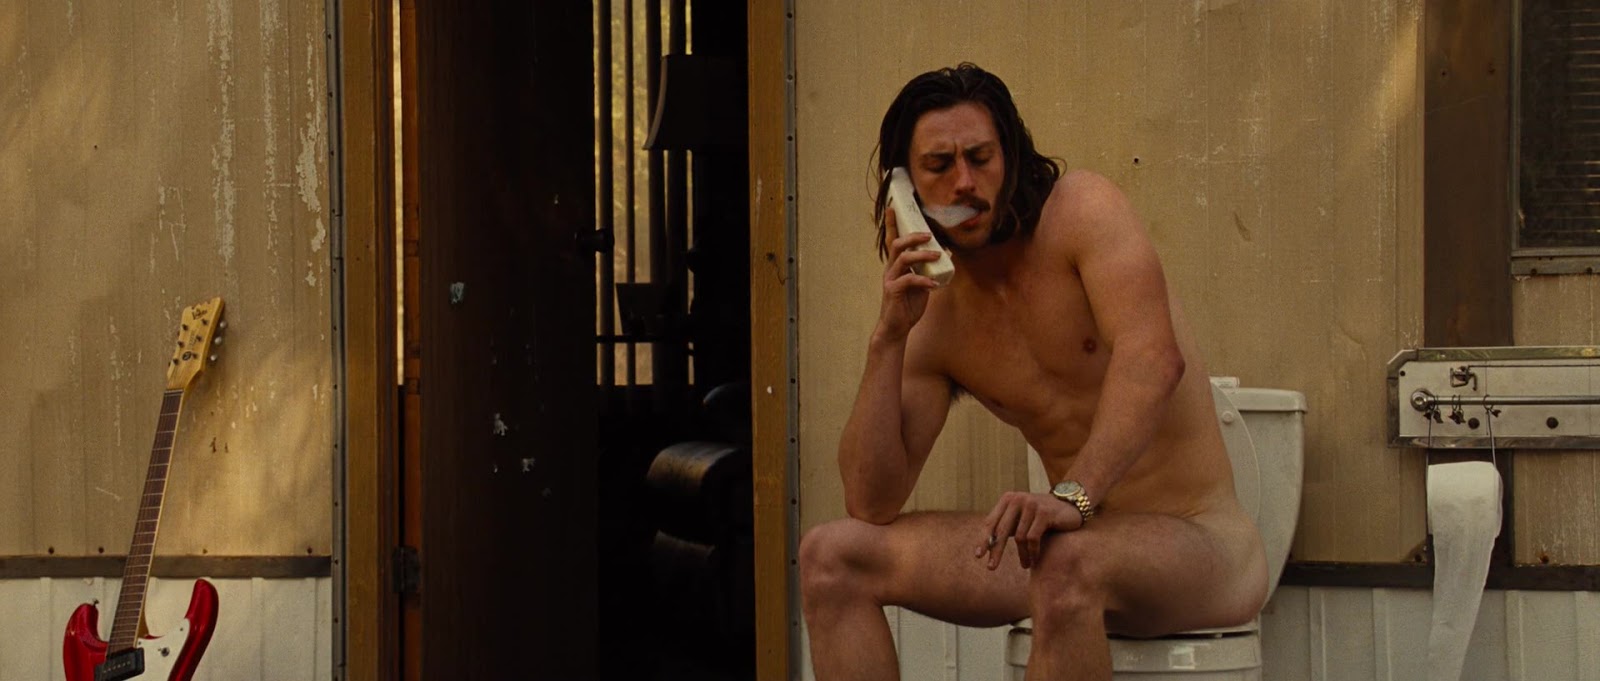 Aaron Taylor-Johnson nude in Nocturnal Animals.